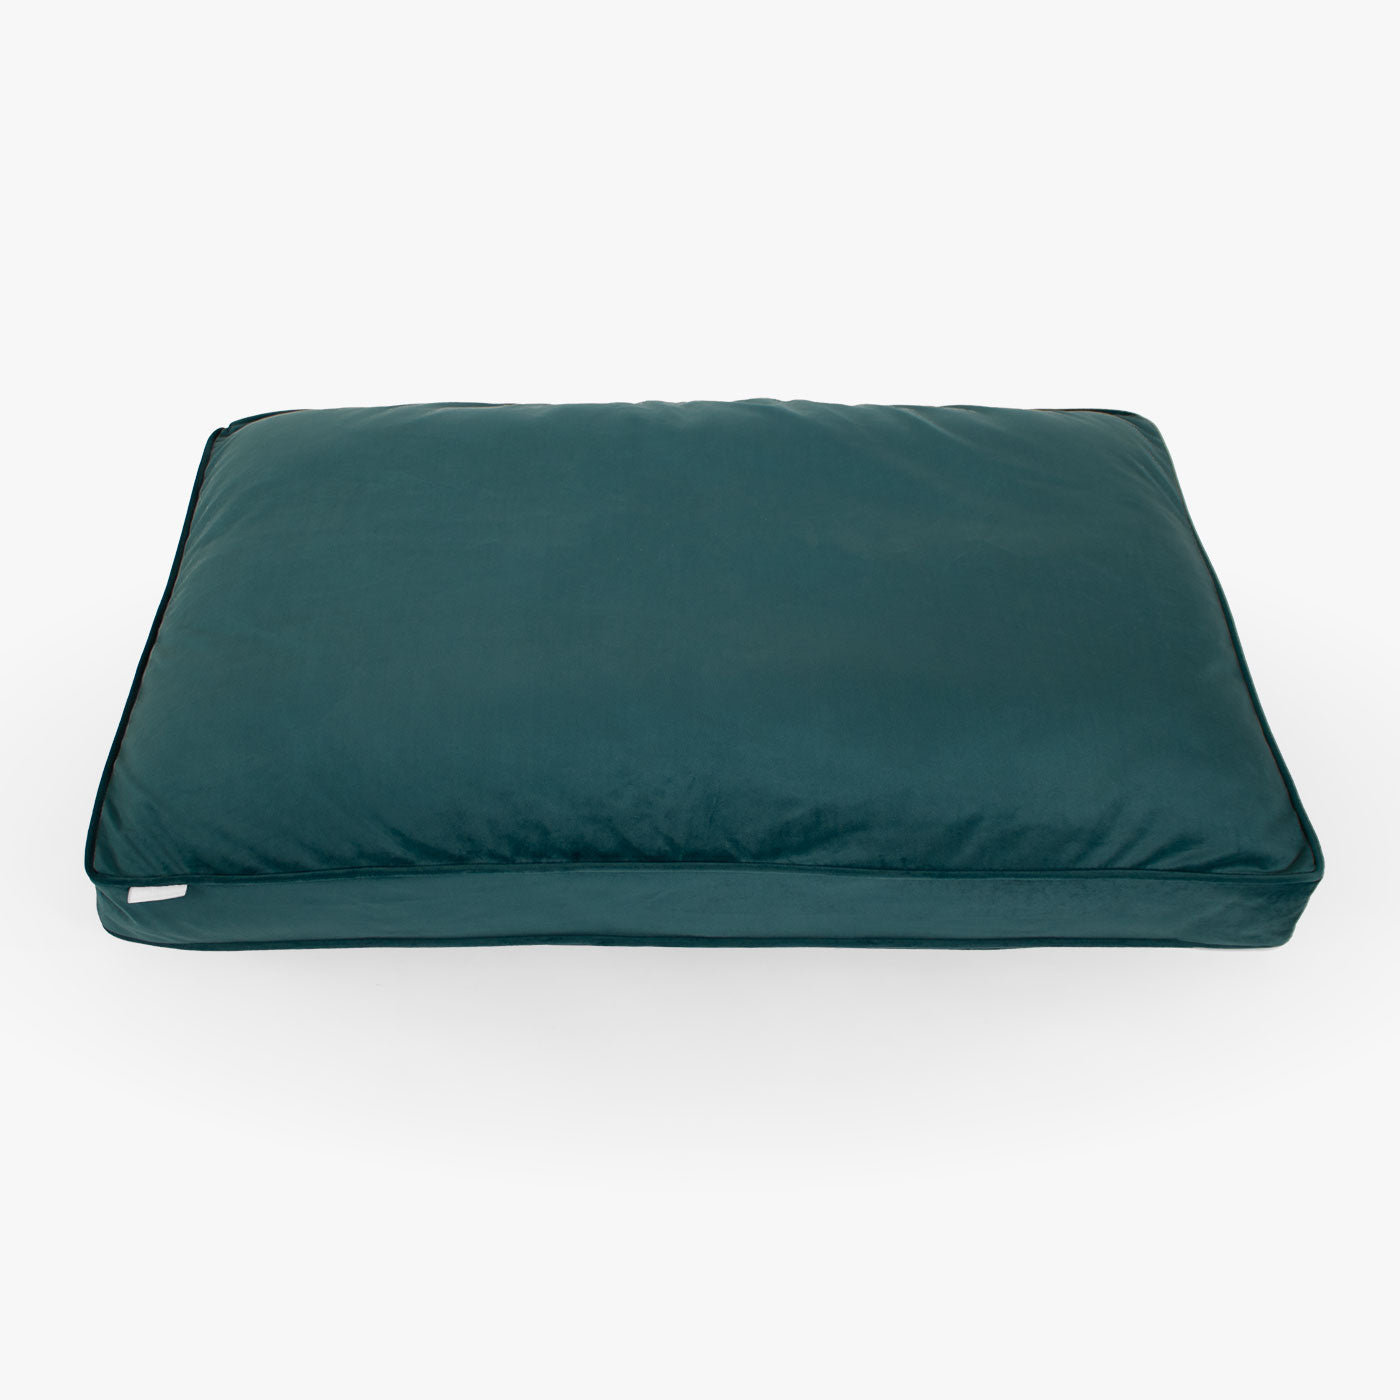 Dog Cushion in Marine Velvet by Lords & Labradors